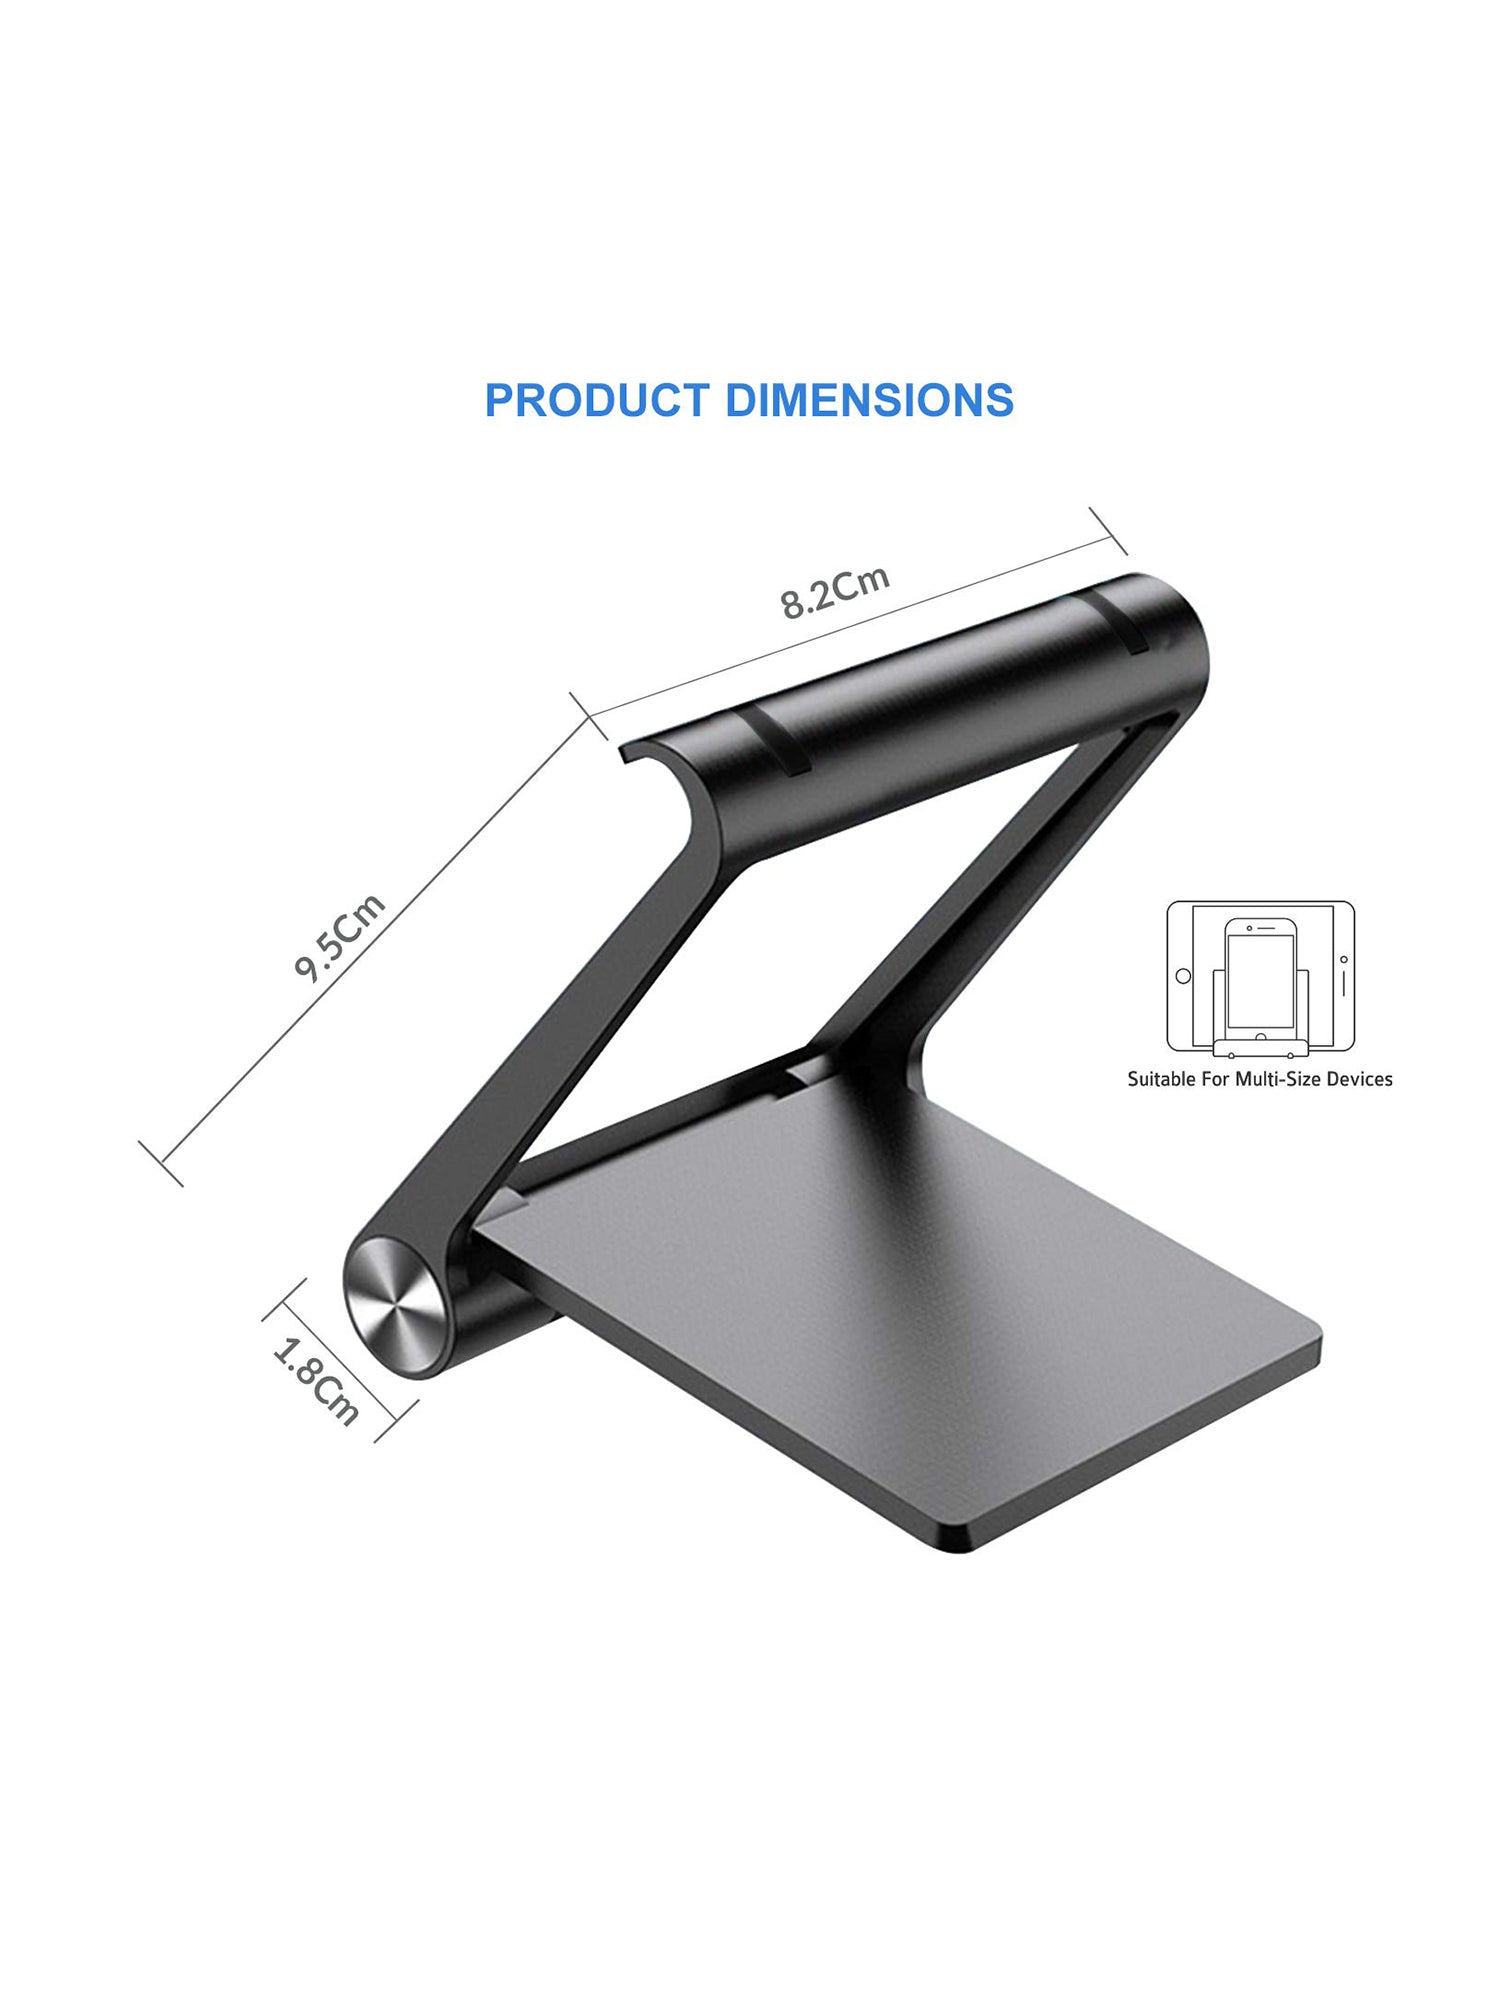 Foldable Tablet/Mobile Phone Stand Holder with Angle adjustments, Anti-Slip Pads